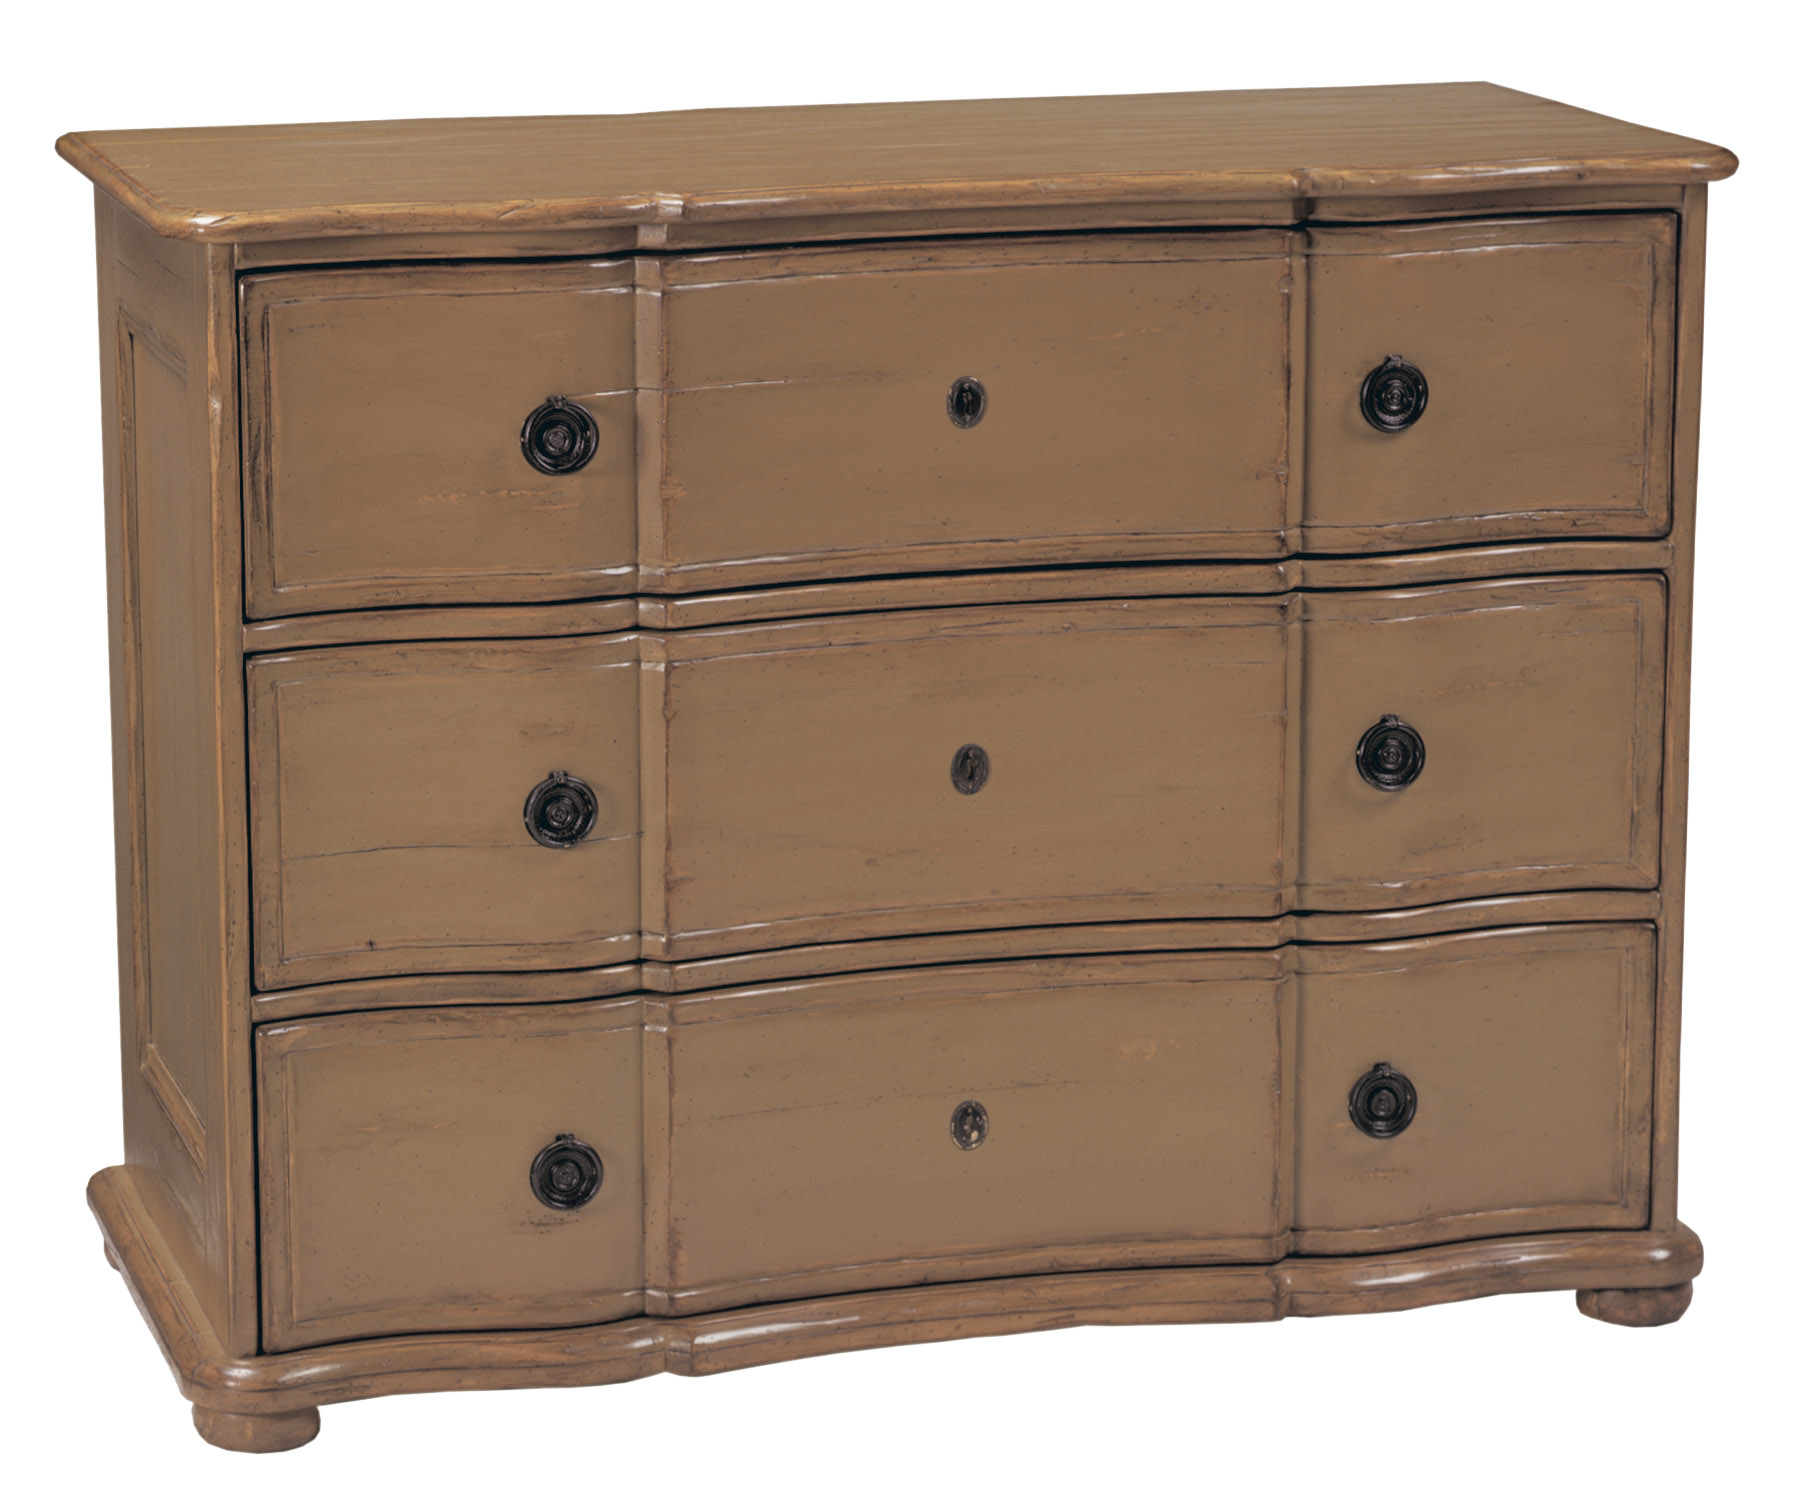 Catania traditional transitional chest or drawers dresser by Woodland furniture in Idaho Falls